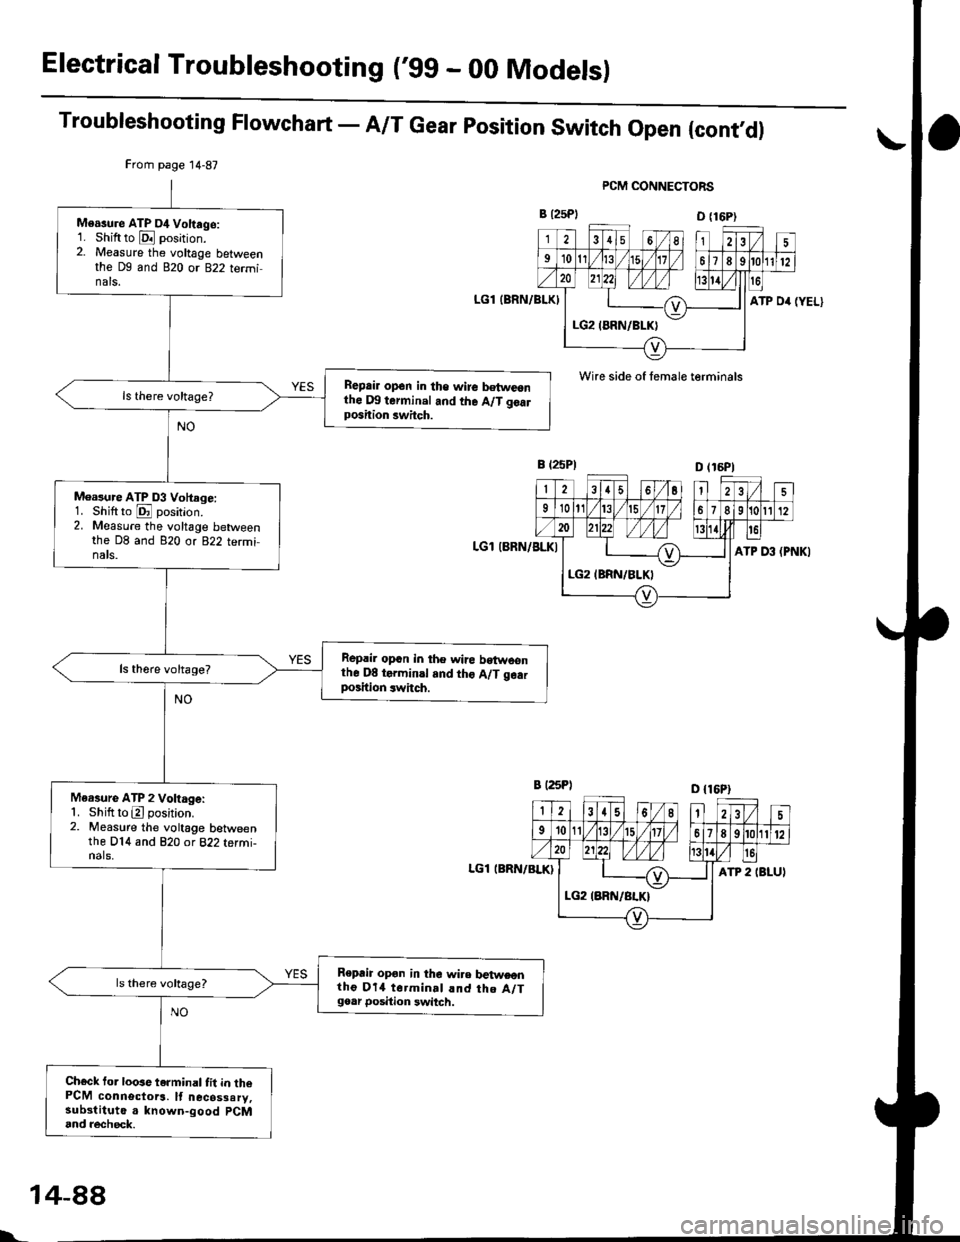 HONDA CIVIC 1997 6.G Repair Manual Electrical Troubleshooting (gg - 00 Models)
Troubleshooting Flowchart - A/T Gear position Switch Open {cont,d)
PCM CONNECTORS
B l2sPlD {16P)
124156I
91011)./t5l/11189112
zo ztzzl l//l hsr),41
f ]_c;l